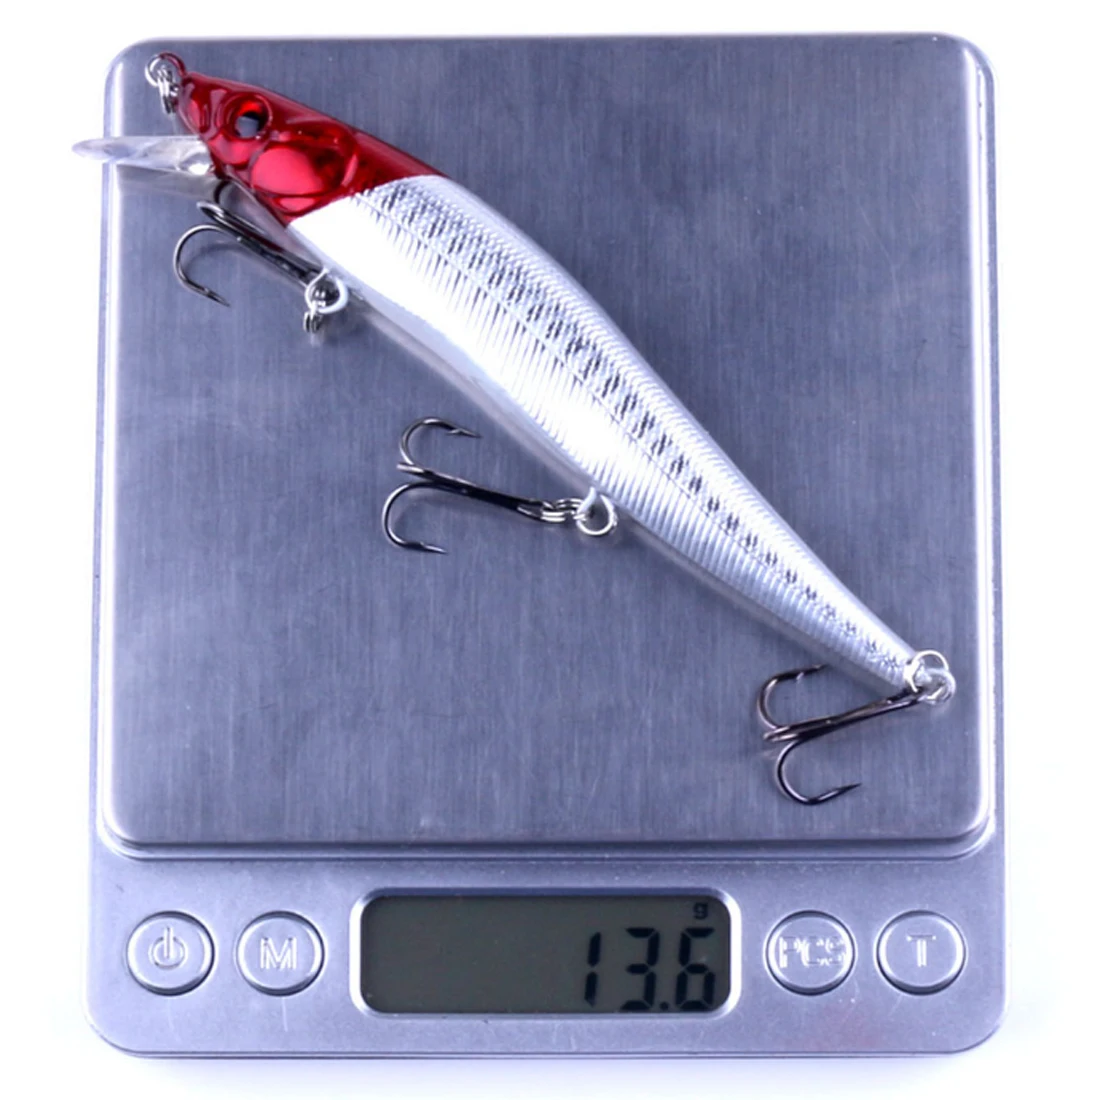 

Hot 1PCS 14cm 23g Minnow Fishing Lures Wobbler Hard Baits Crankbaits ABS Isca Artificial Lure For Bass Pike Fishing Tackle